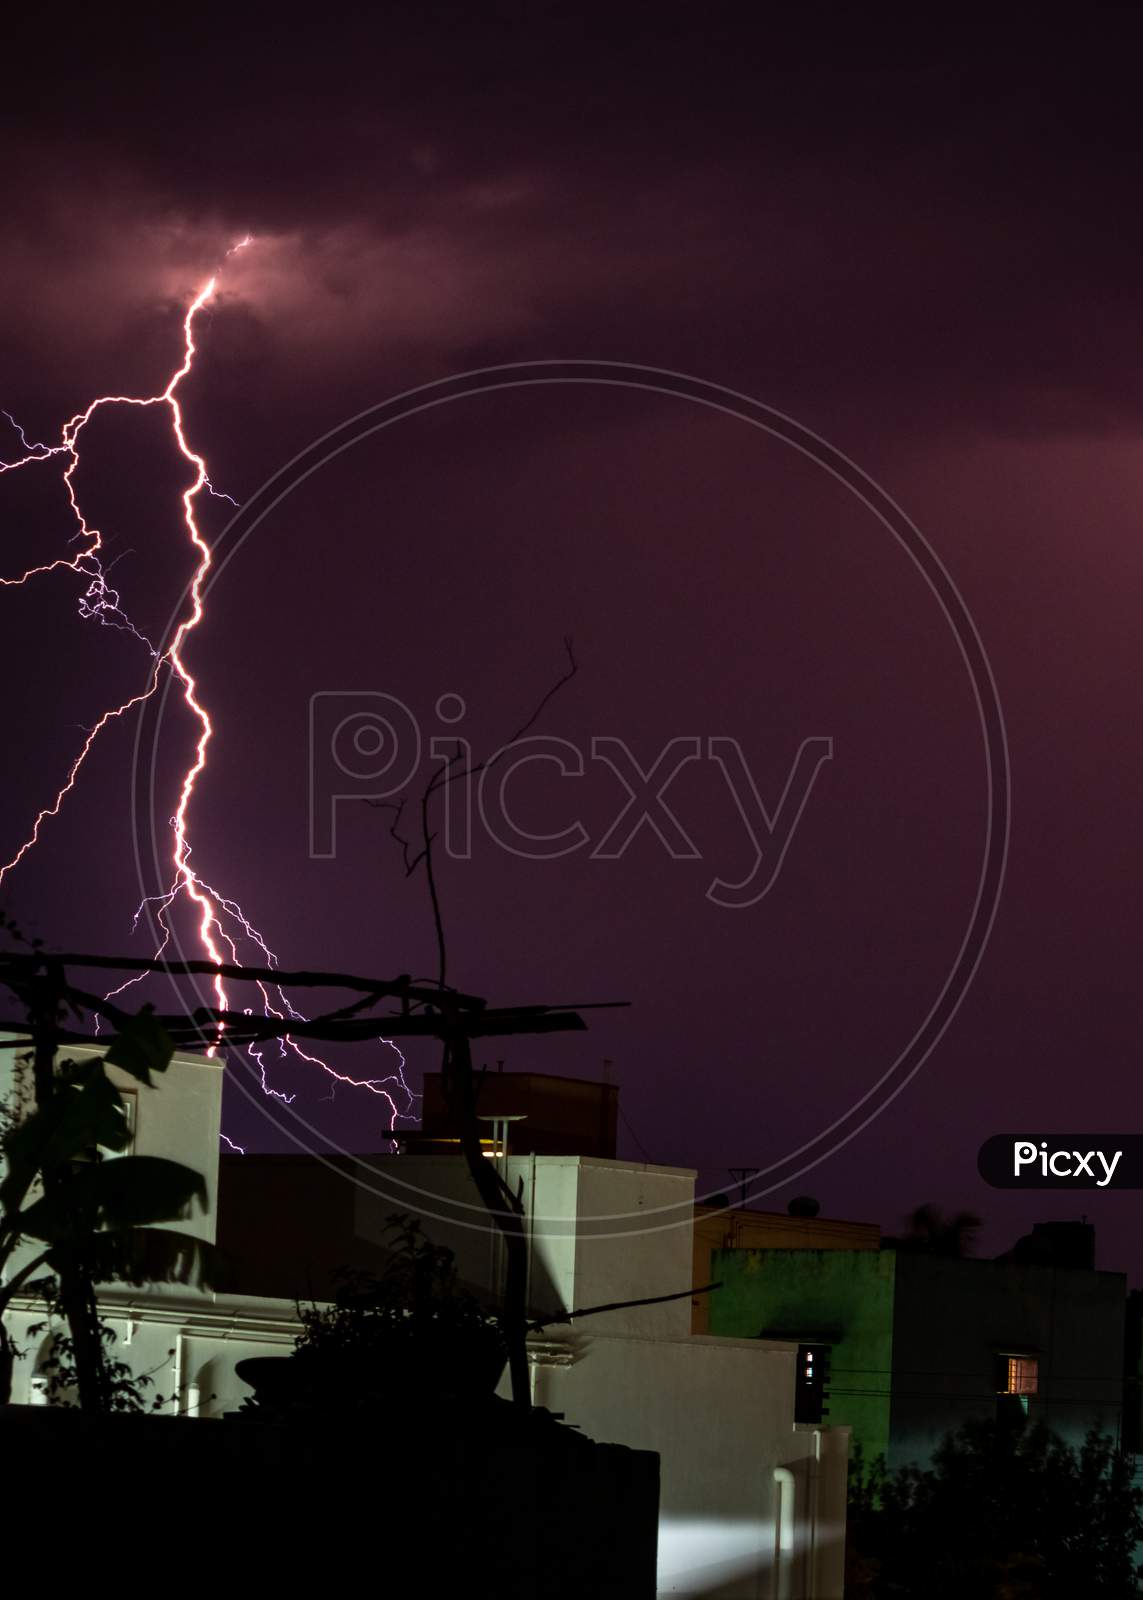 Lightning Storm Over The City Buildings. Lightning Bolt Strike During A Thunderstorm On Metropolitan City. Dark Sky With Bright Electrical Flash, Thunder And Thunderbolt, Bad Weather Concept